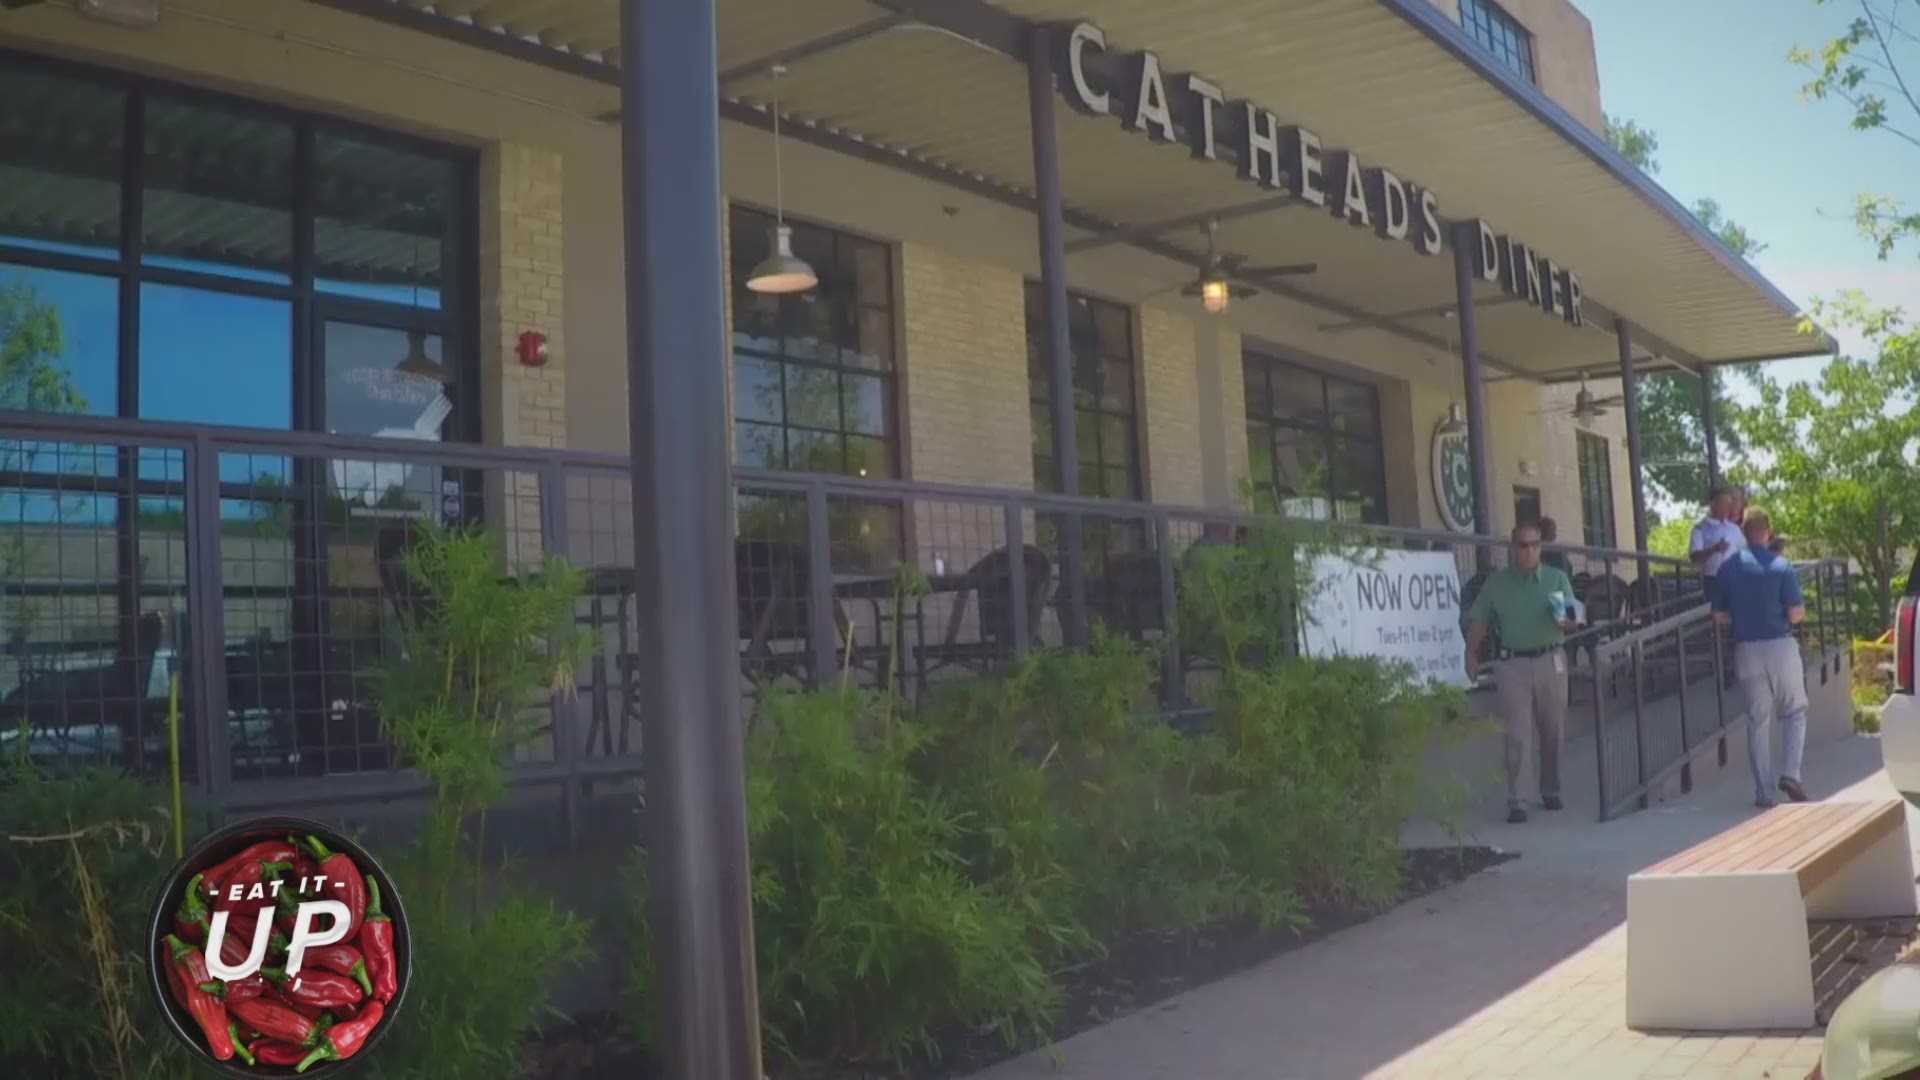 Must-watch -- In this week's "Eat It Up," Amanda and Rob visit the new Cathead's Diner.